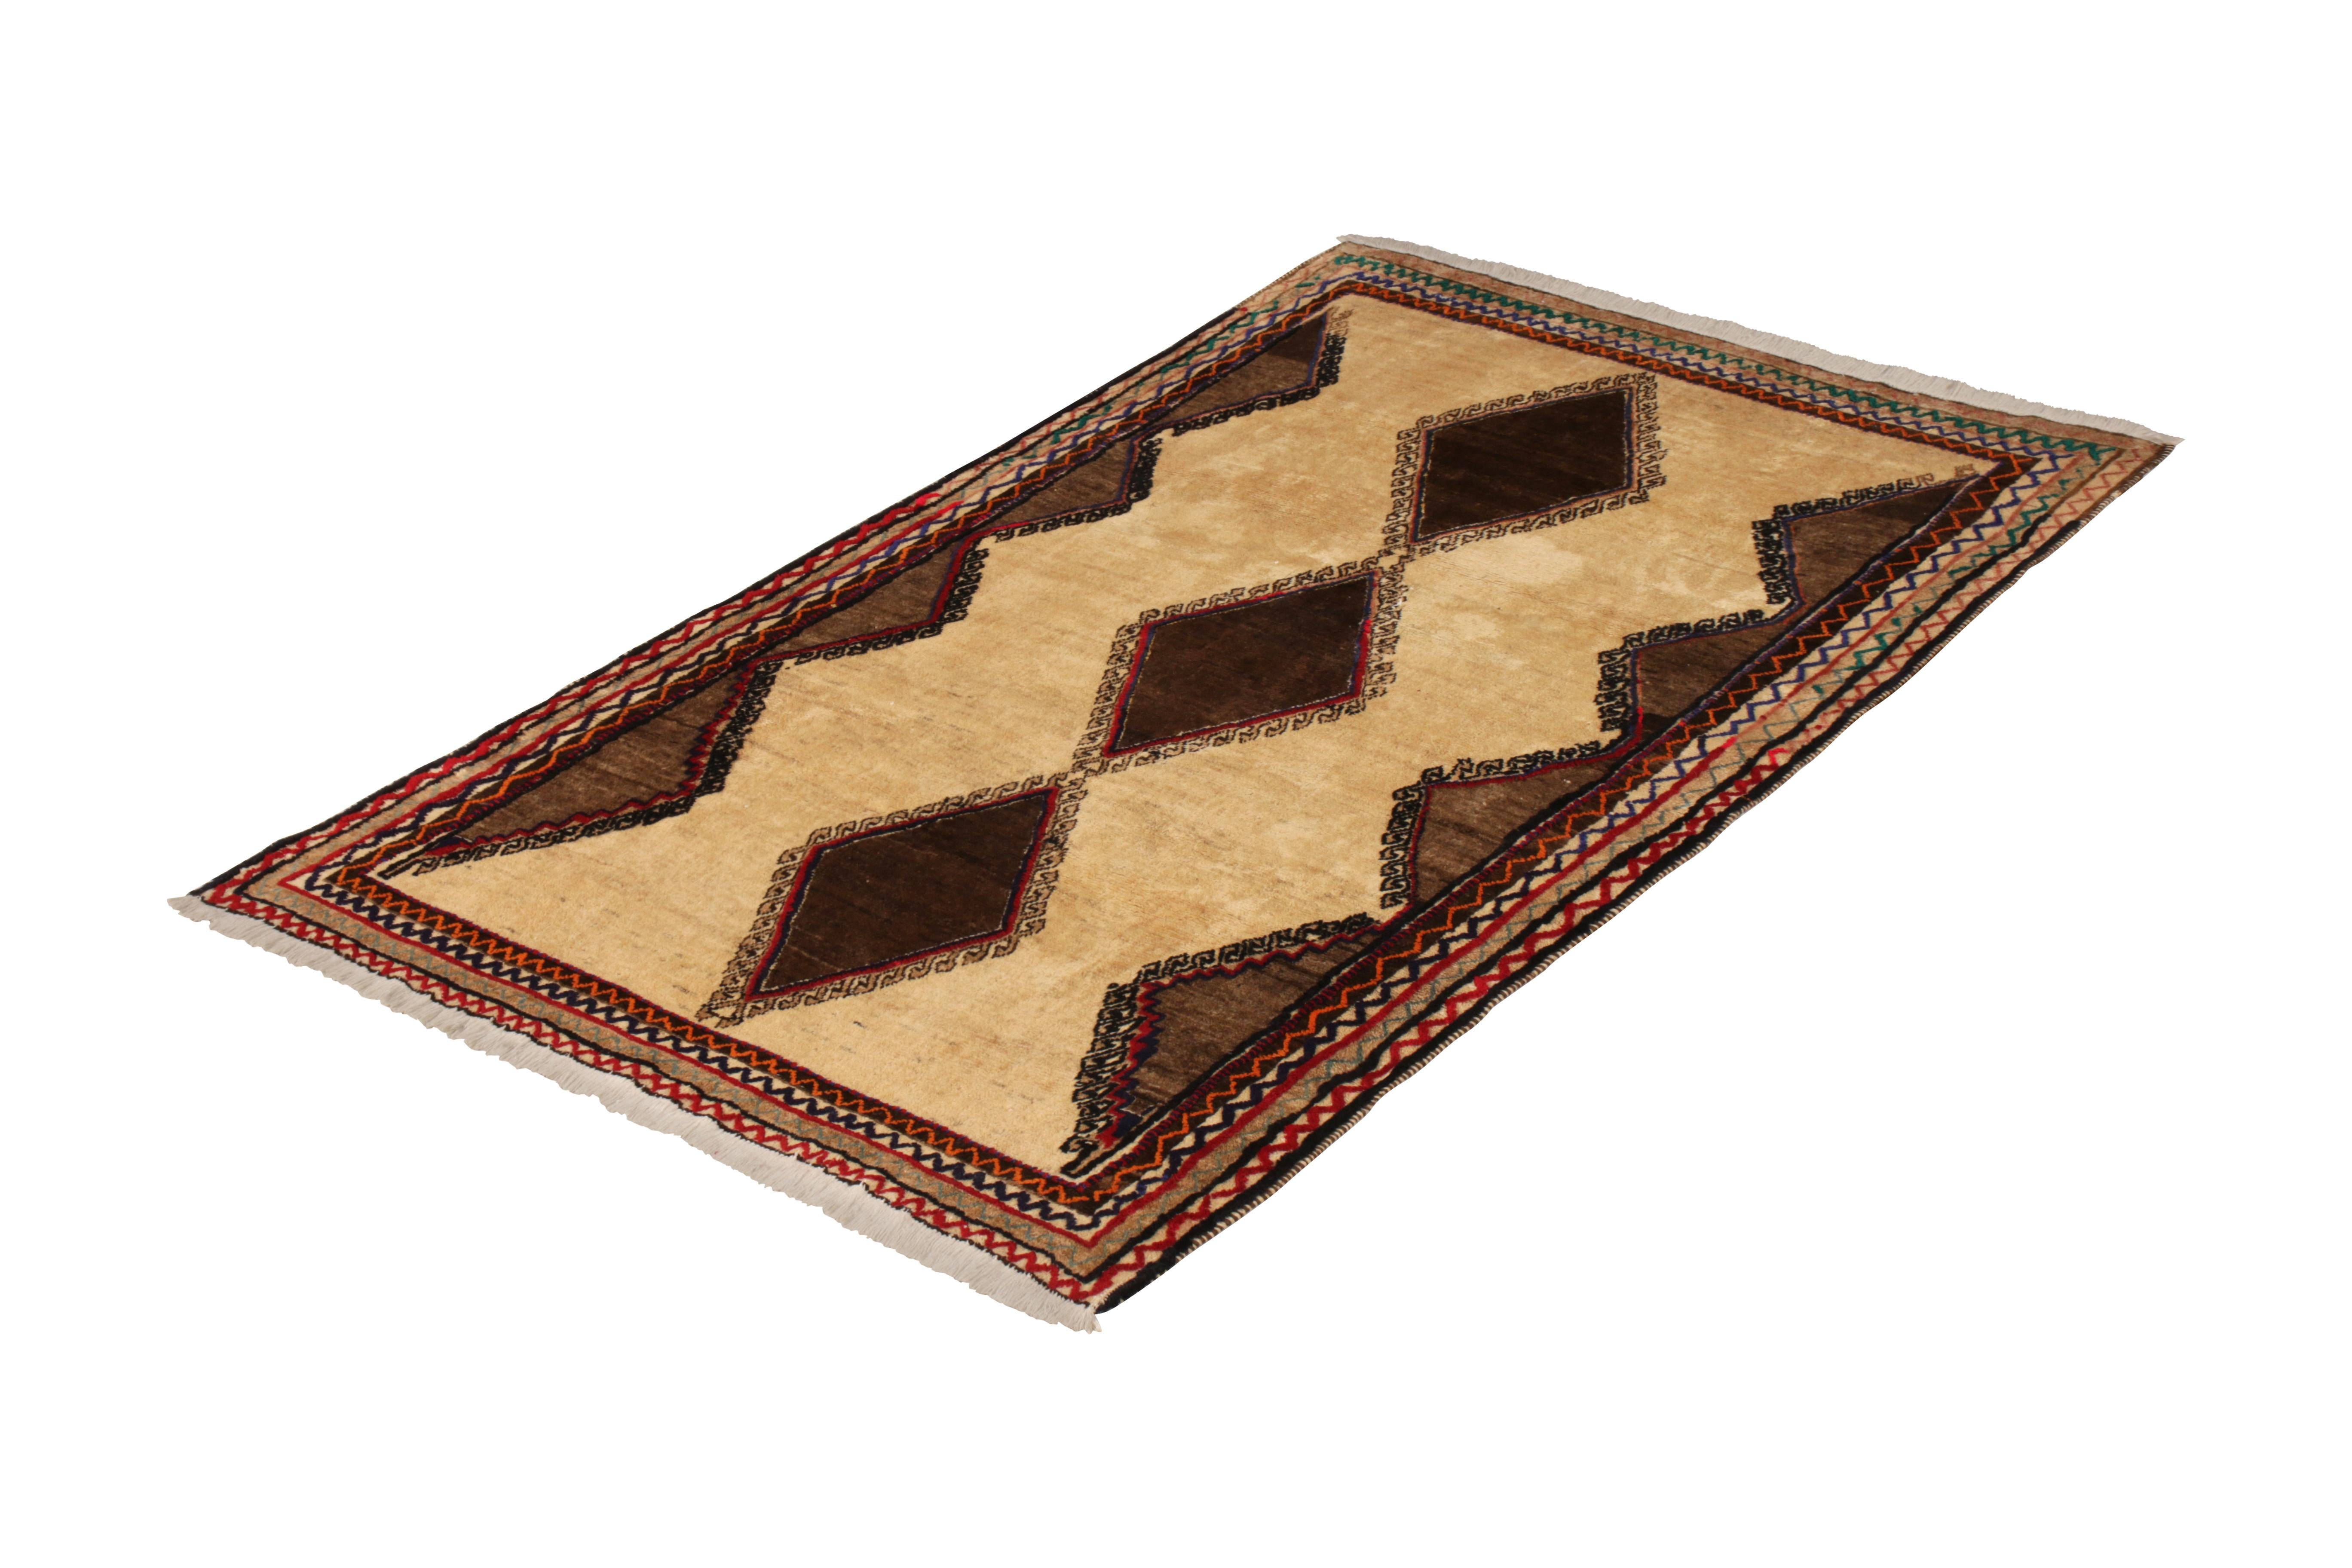 A 5 x 8 vintage Persian rug of Gabbeh tribal design, hand-knotted in wool originating, circa 1950-1960. Warm and rich beige-brown hues with colorful accents among classic mid-century Gabbeh diamond patterns and meandering borders. In good condition